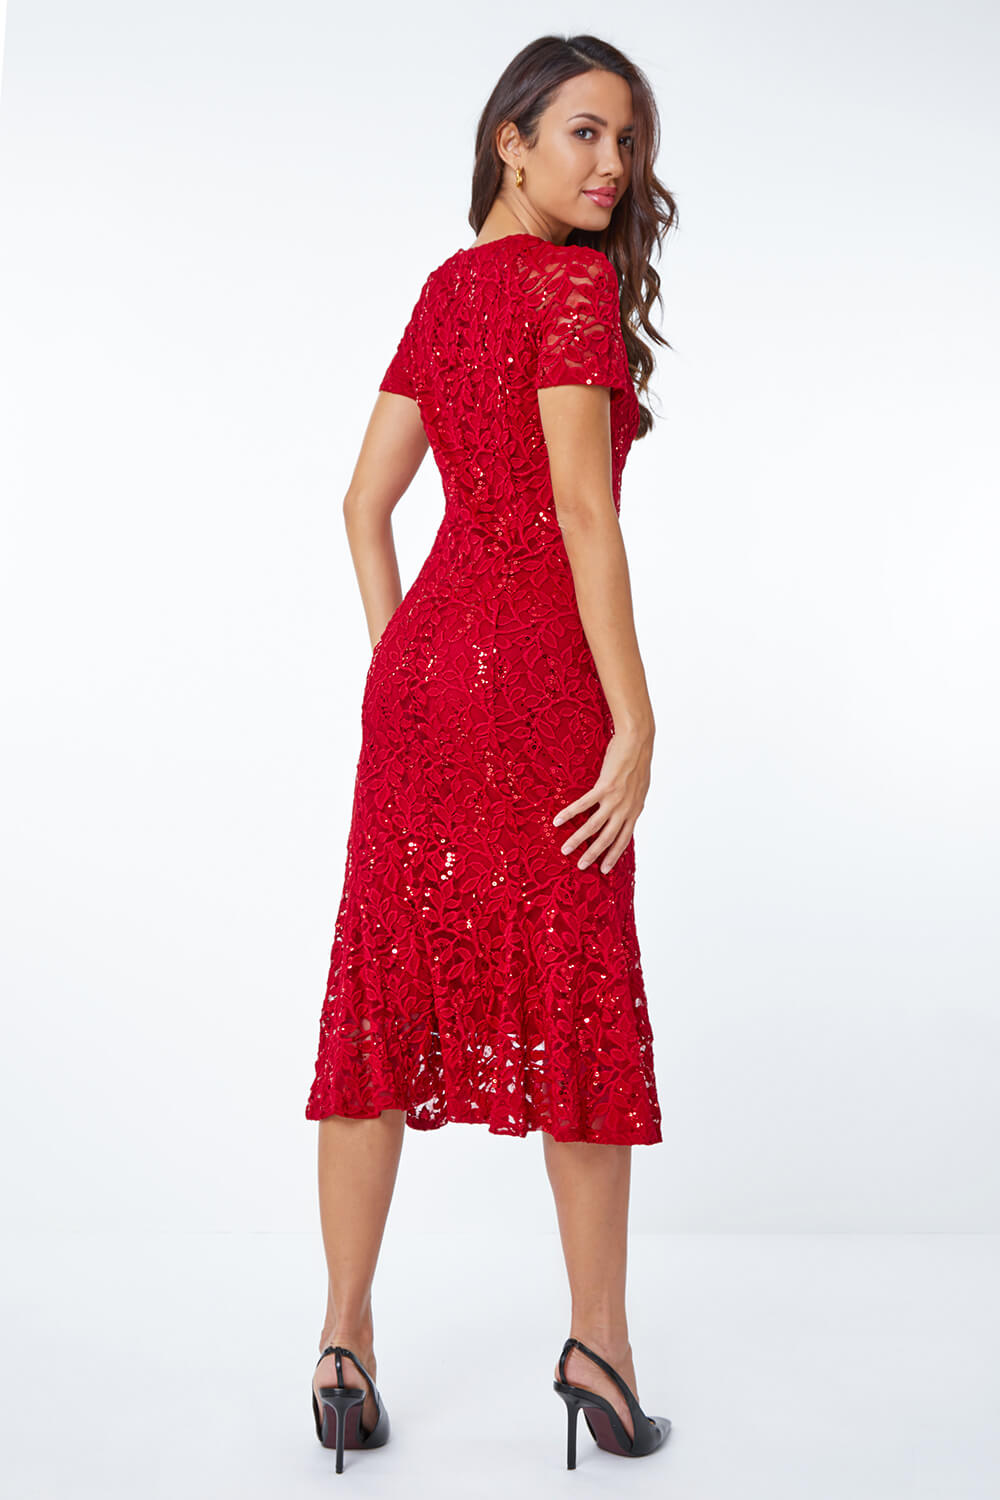 Red Leaf Lace Sequin Midi Dress, Image 3 of 5